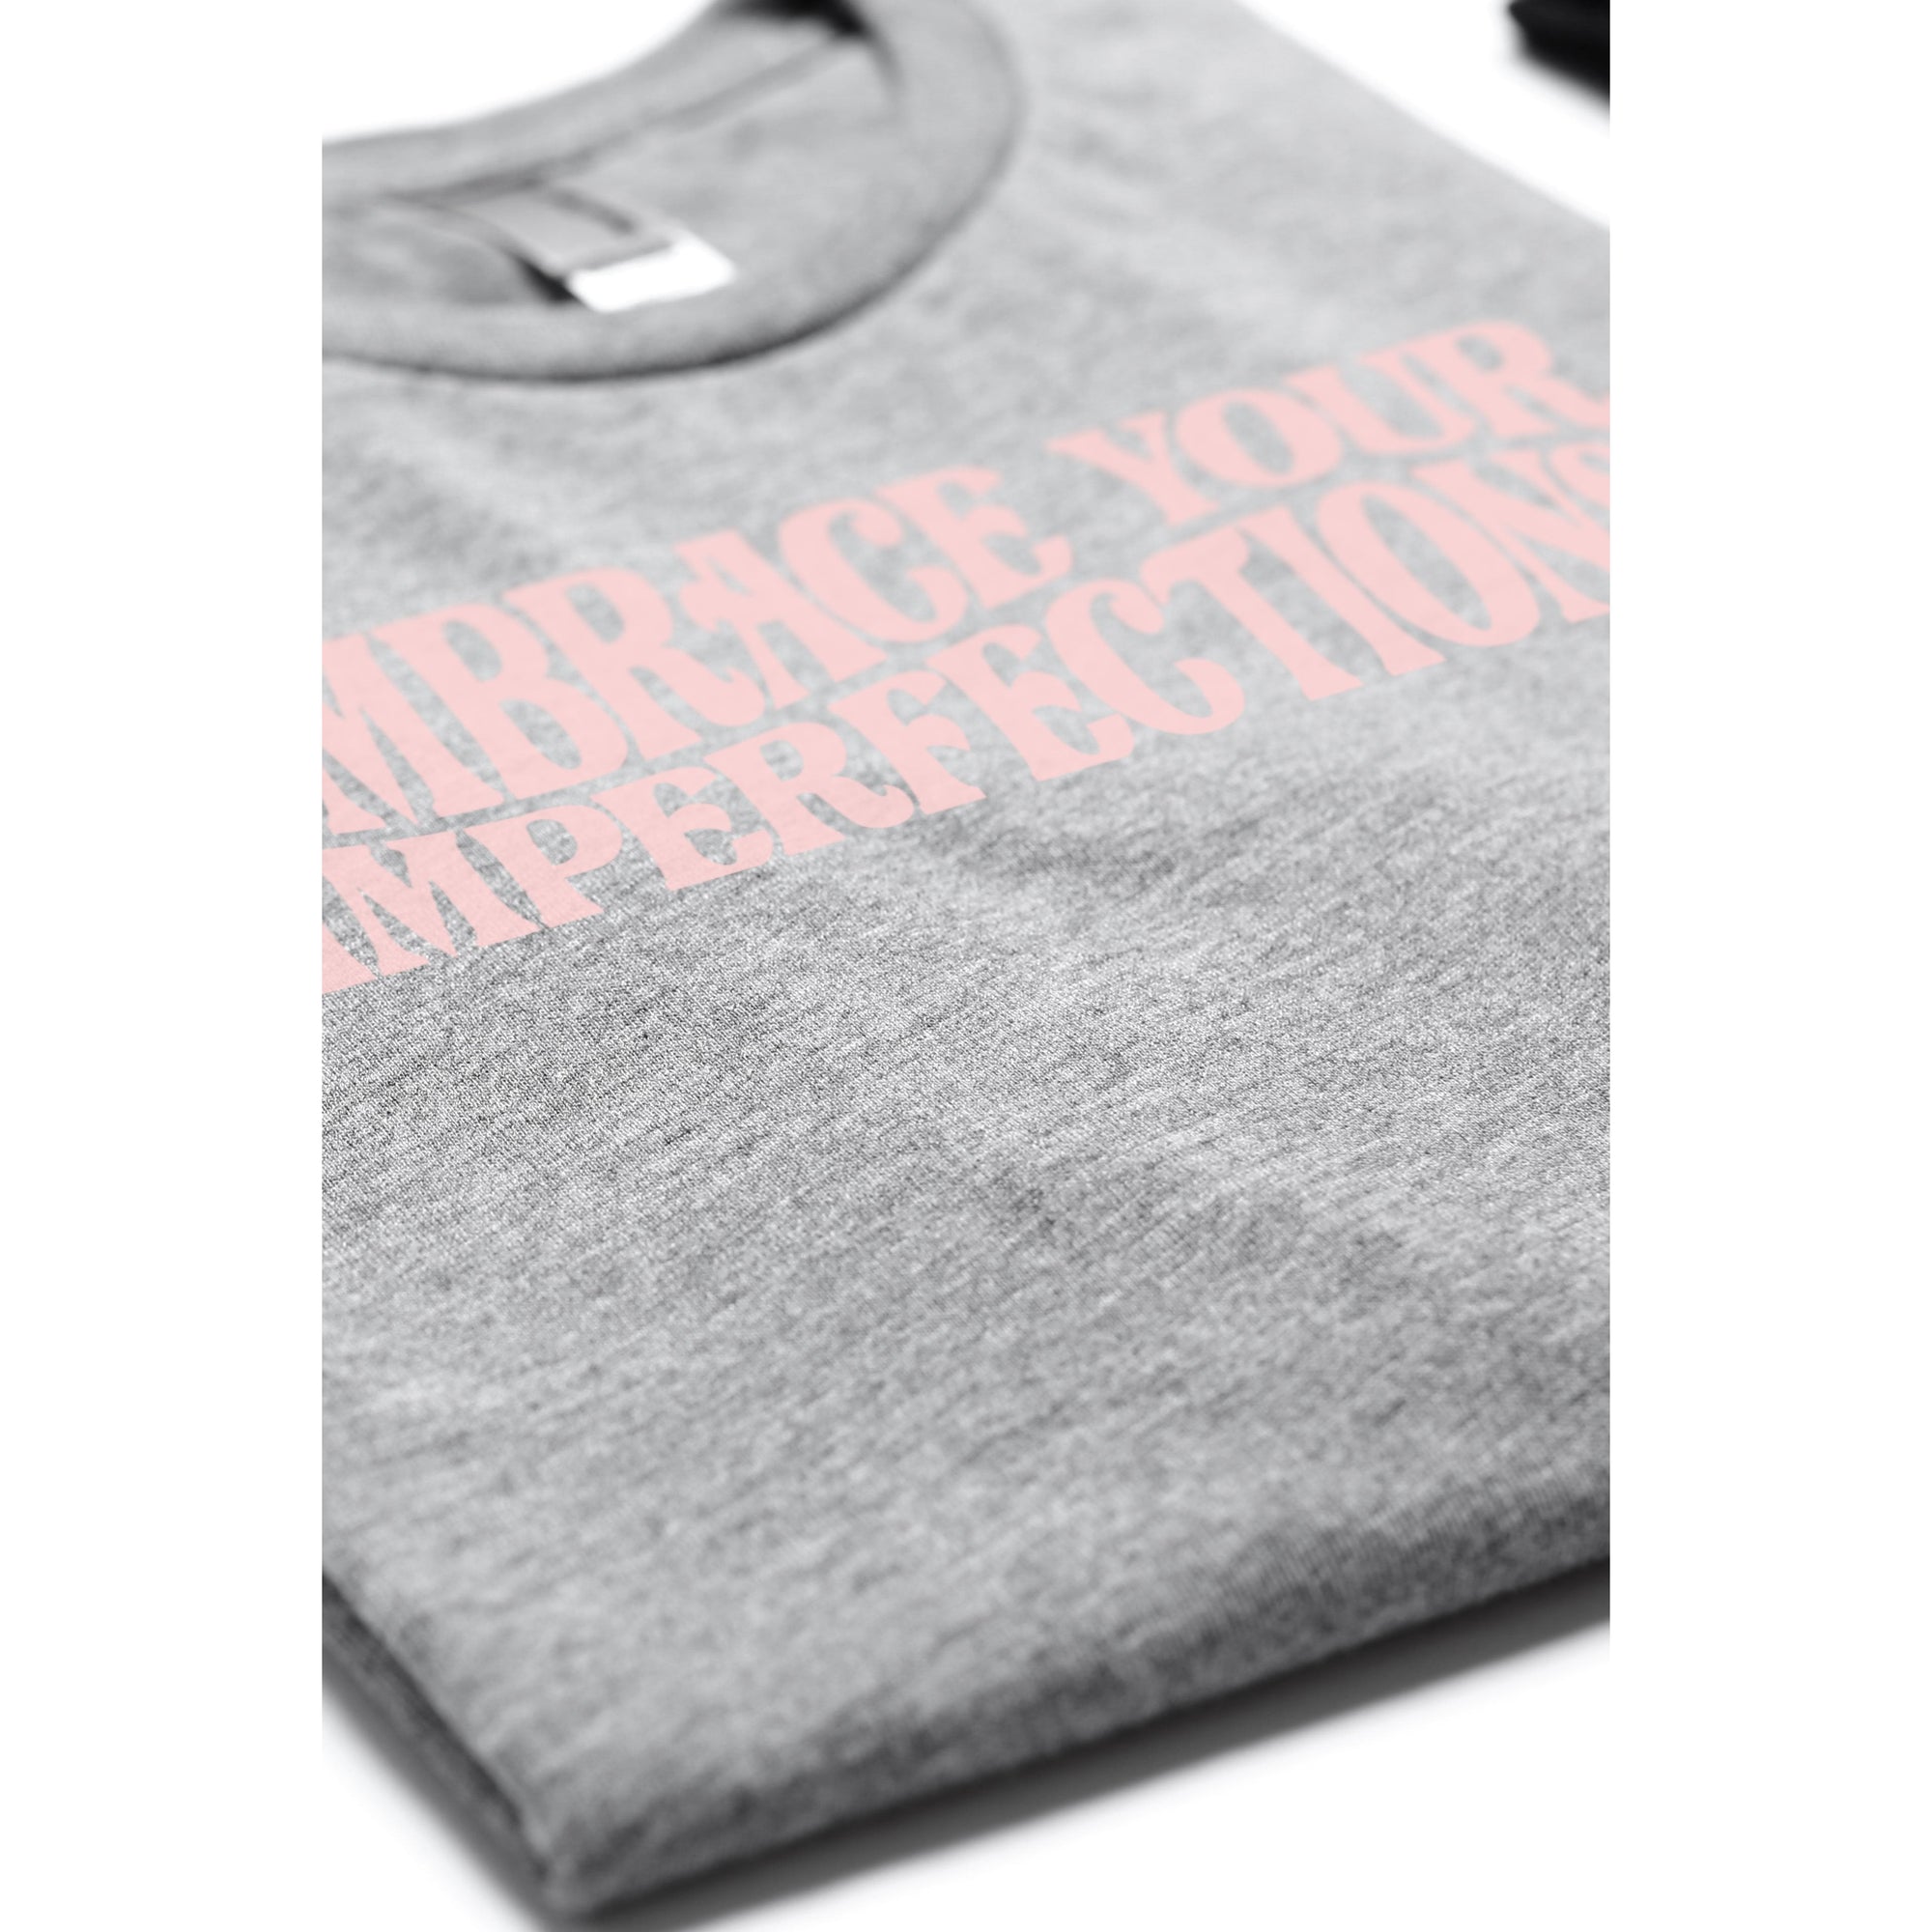 Embrace Your Imperfections - threadtank | stories you can wear